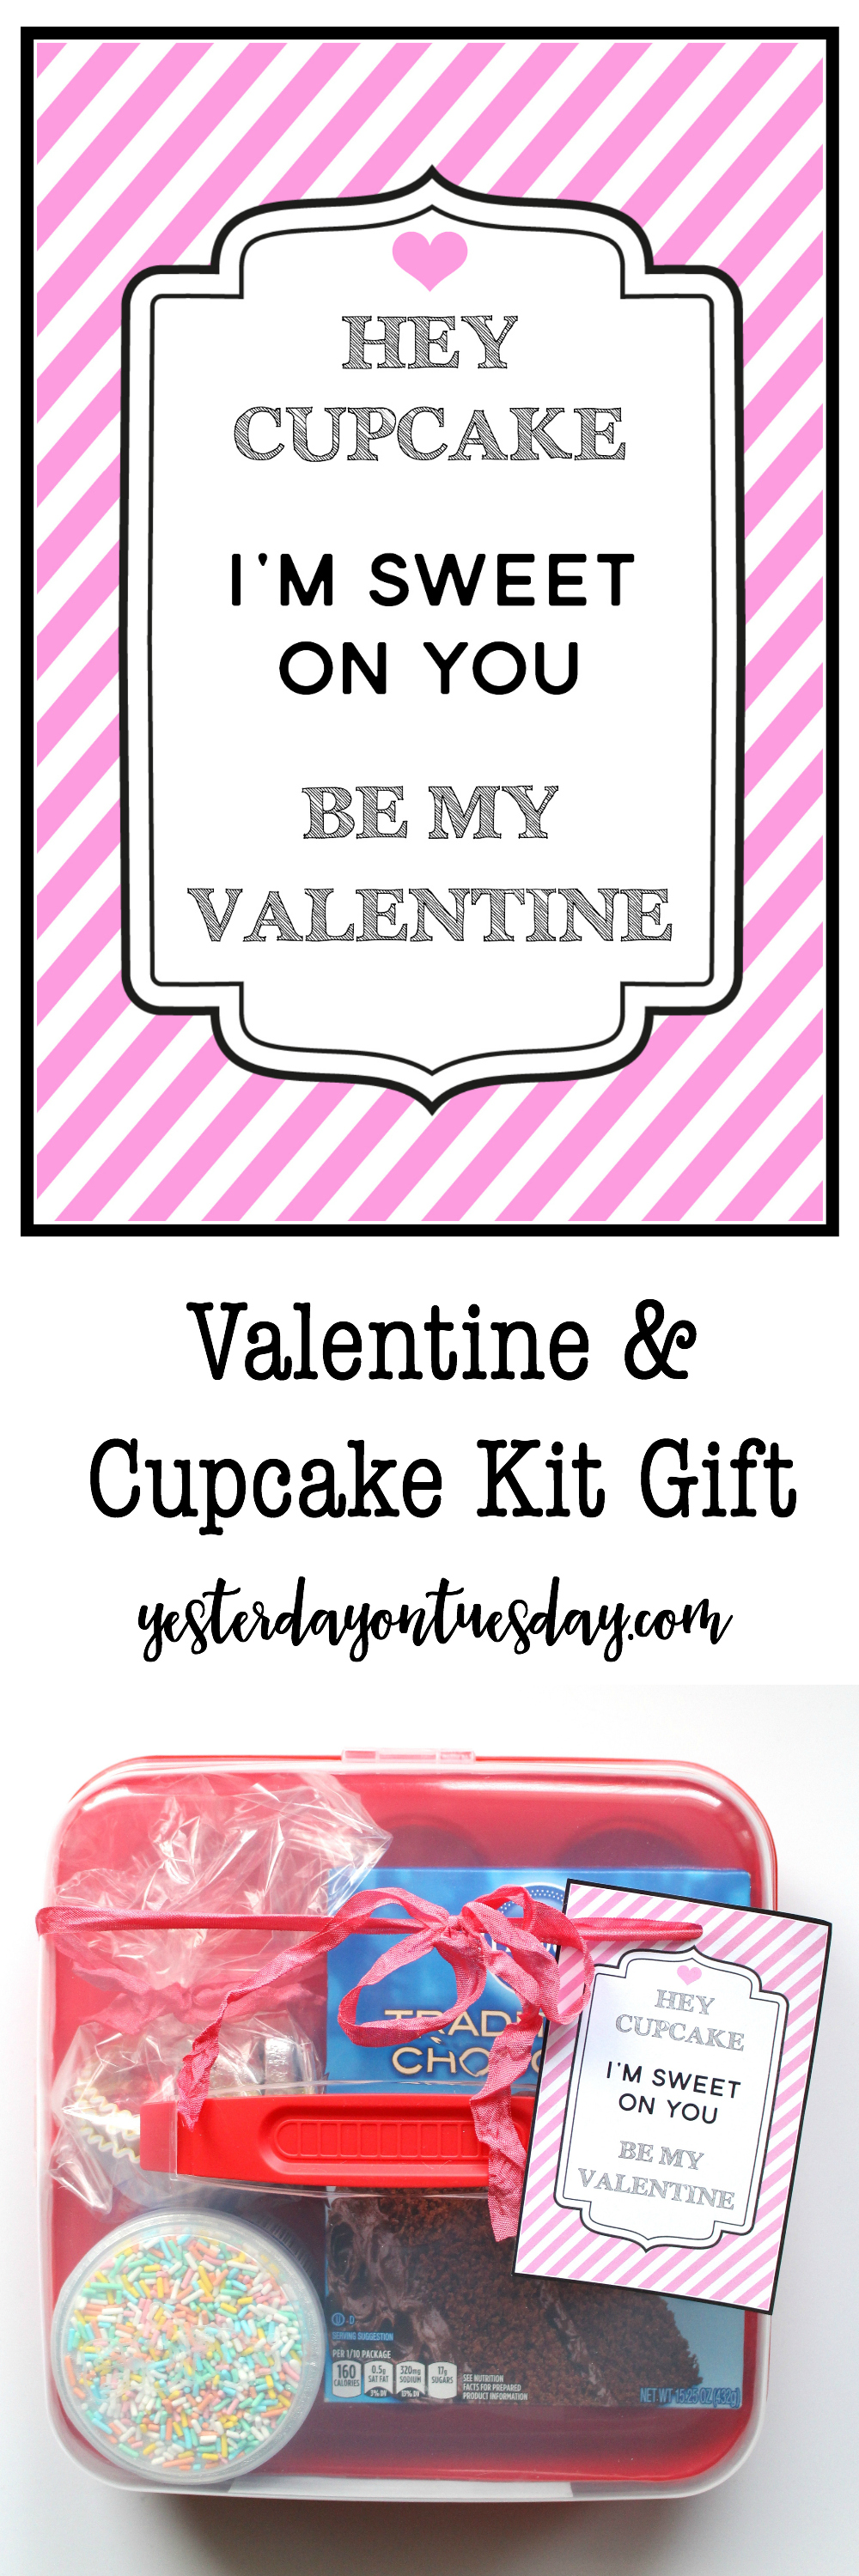 Valentine and Cupcake Gift Kit: Funny cupcake Valentine, a free printable fun with a few items from the dollar store that can be used to make and decorate cupcakes! Budget friendly Valentine's Day gift idea.